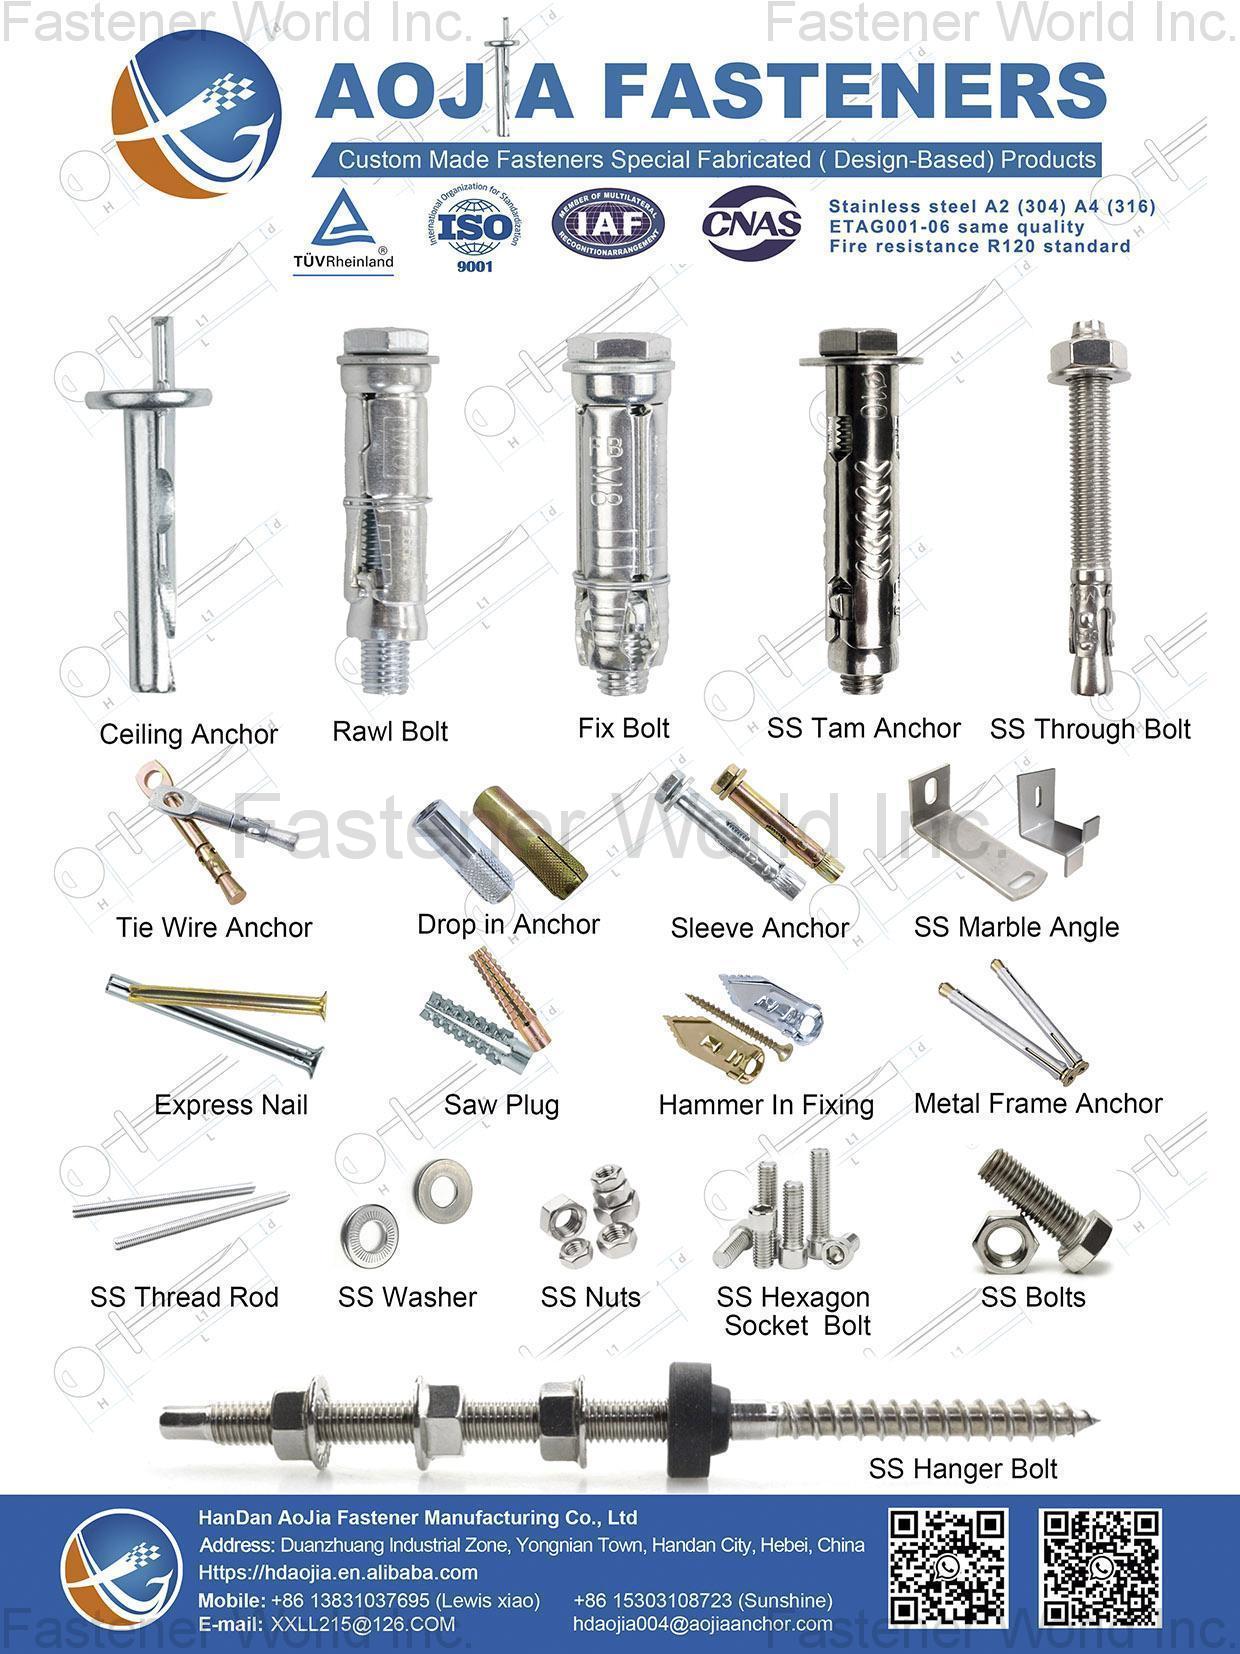 HANDAN AOJIA FASTENERS MANUFACTURING CO., LTD. , Ceiling Anchor, Rawl Bolt, Fix Bolt, SS Tam Anchor, SS Through Bolt, Tie Wire Anchor, Drop in Anchor, Sleeve Anchor, SS Marble Angle, Express Nail, Saw Plug, Hammer in Fixing, Metal Frame Anchor, SS Thread Rod, SS Washer, SS Nuts, SS Hexagon Socket Bolt, SS Bolts, SS Hanger Bolt